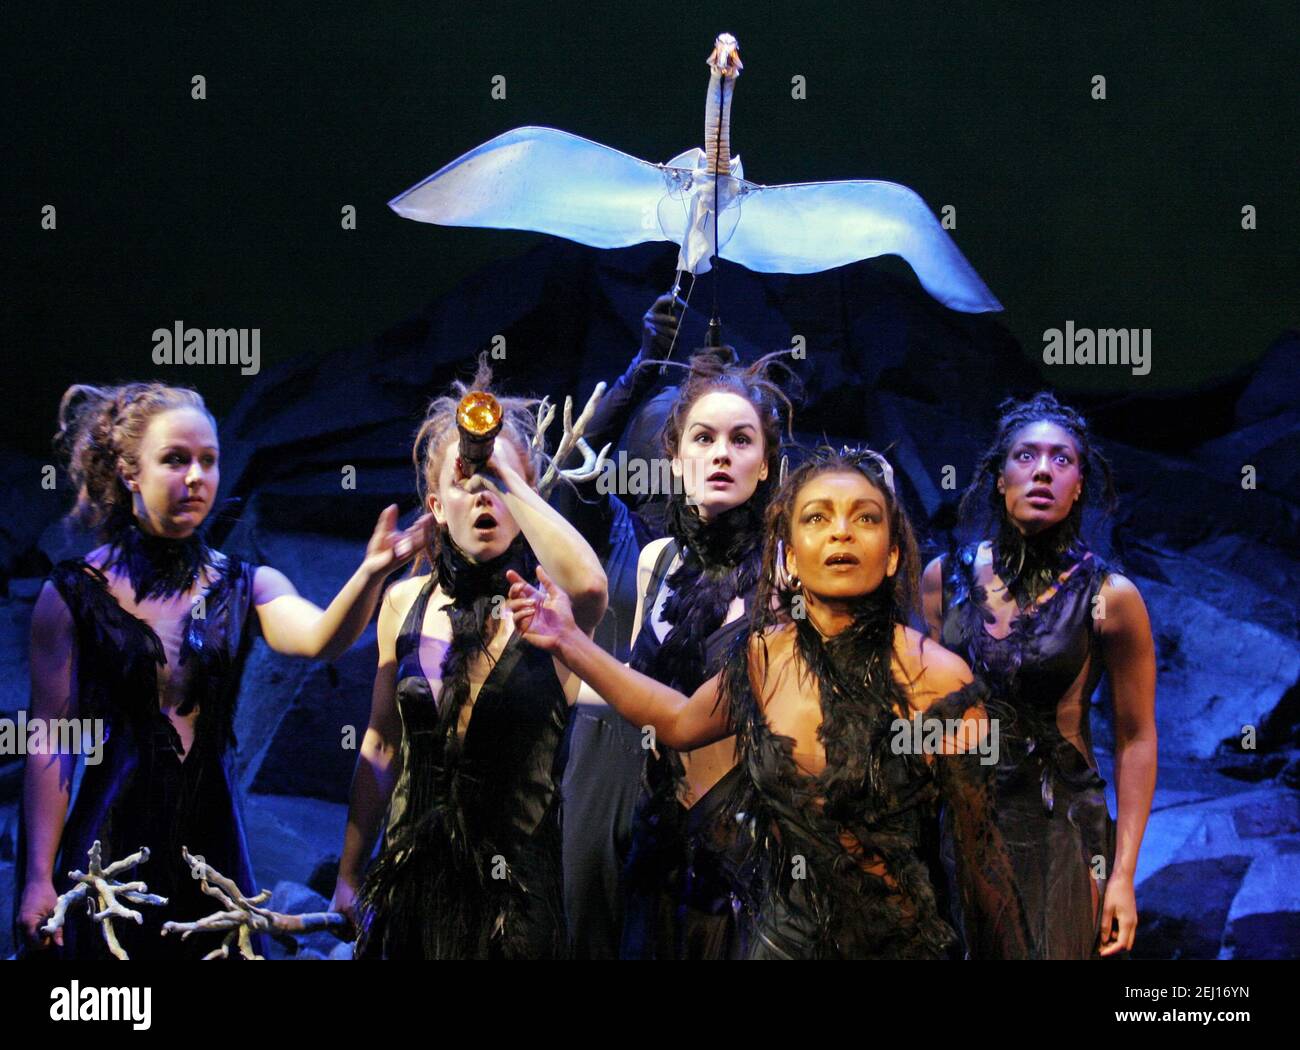 front right: Adjoa Andoh (Serafina Pekkala, Queen of the Lapland Witches) in HIS DARK MATERIALS by Philip Pullman at the Olivier Theatre, National Theatre (NT), London SE1  08/12/2004  adapted by Nicholas Wright  set design: Giles Cadle  costumes: Jon Morrell  puppets: Michael Curry  choreographer: Aletta Collins  fights: Terry King  lighting: Paule Constable  directors: Nicholas Hytner & Matt Wilde Stock Photo